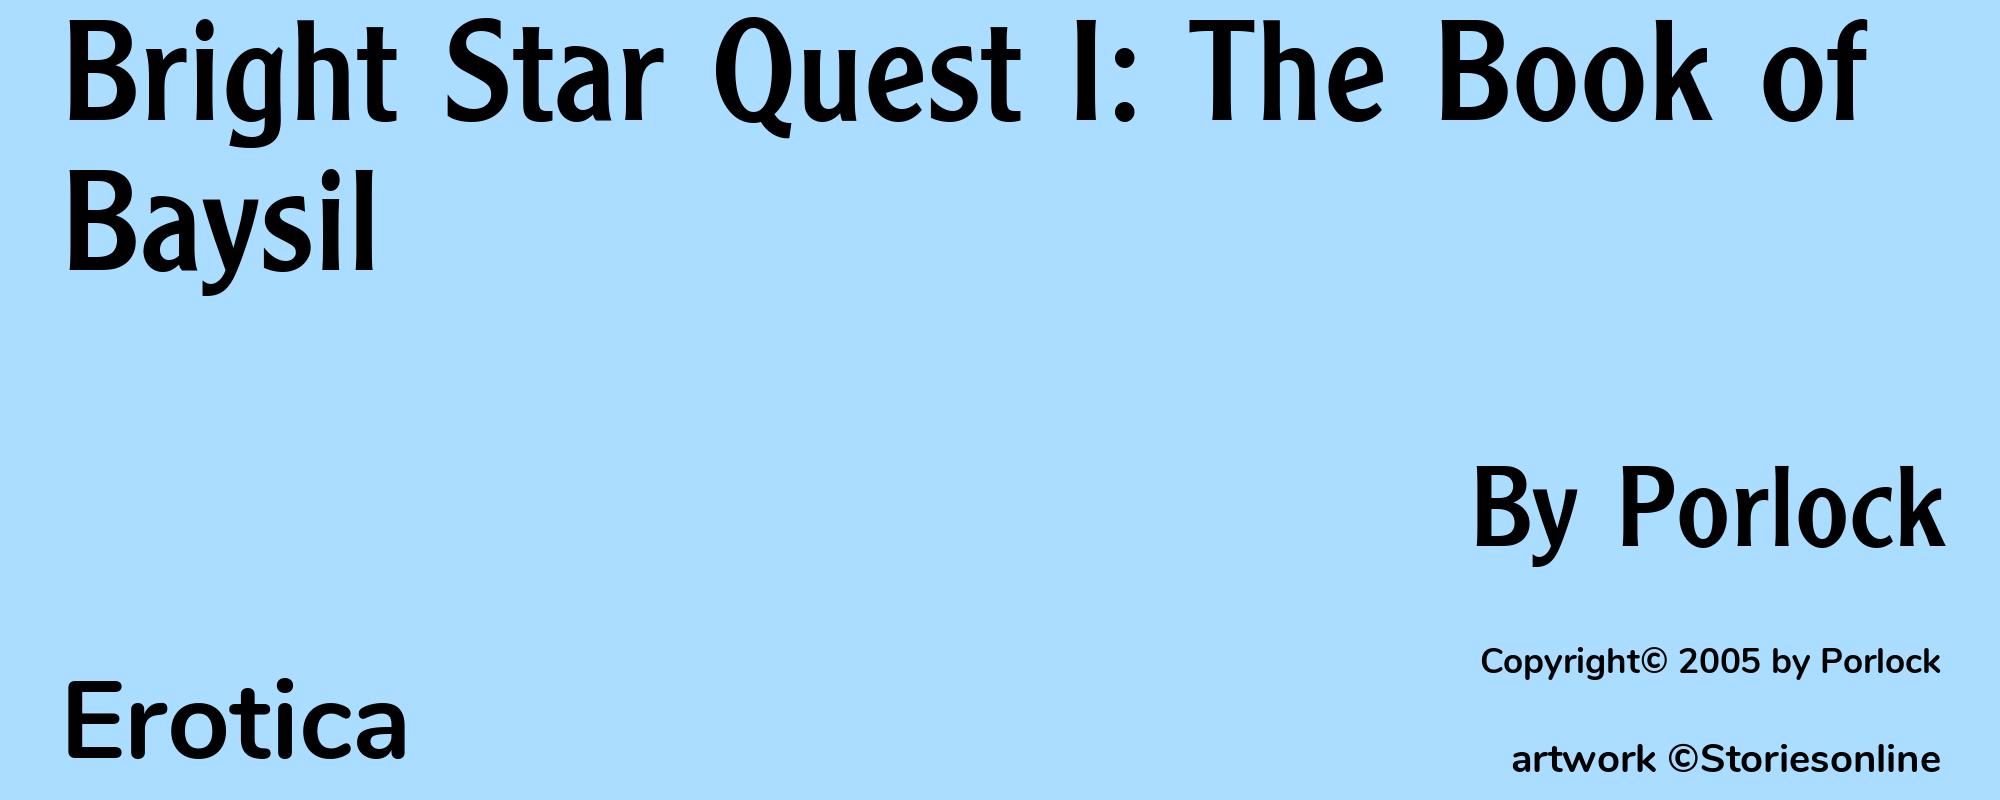 Bright Star Quest I: The Book of Baysil - Cover